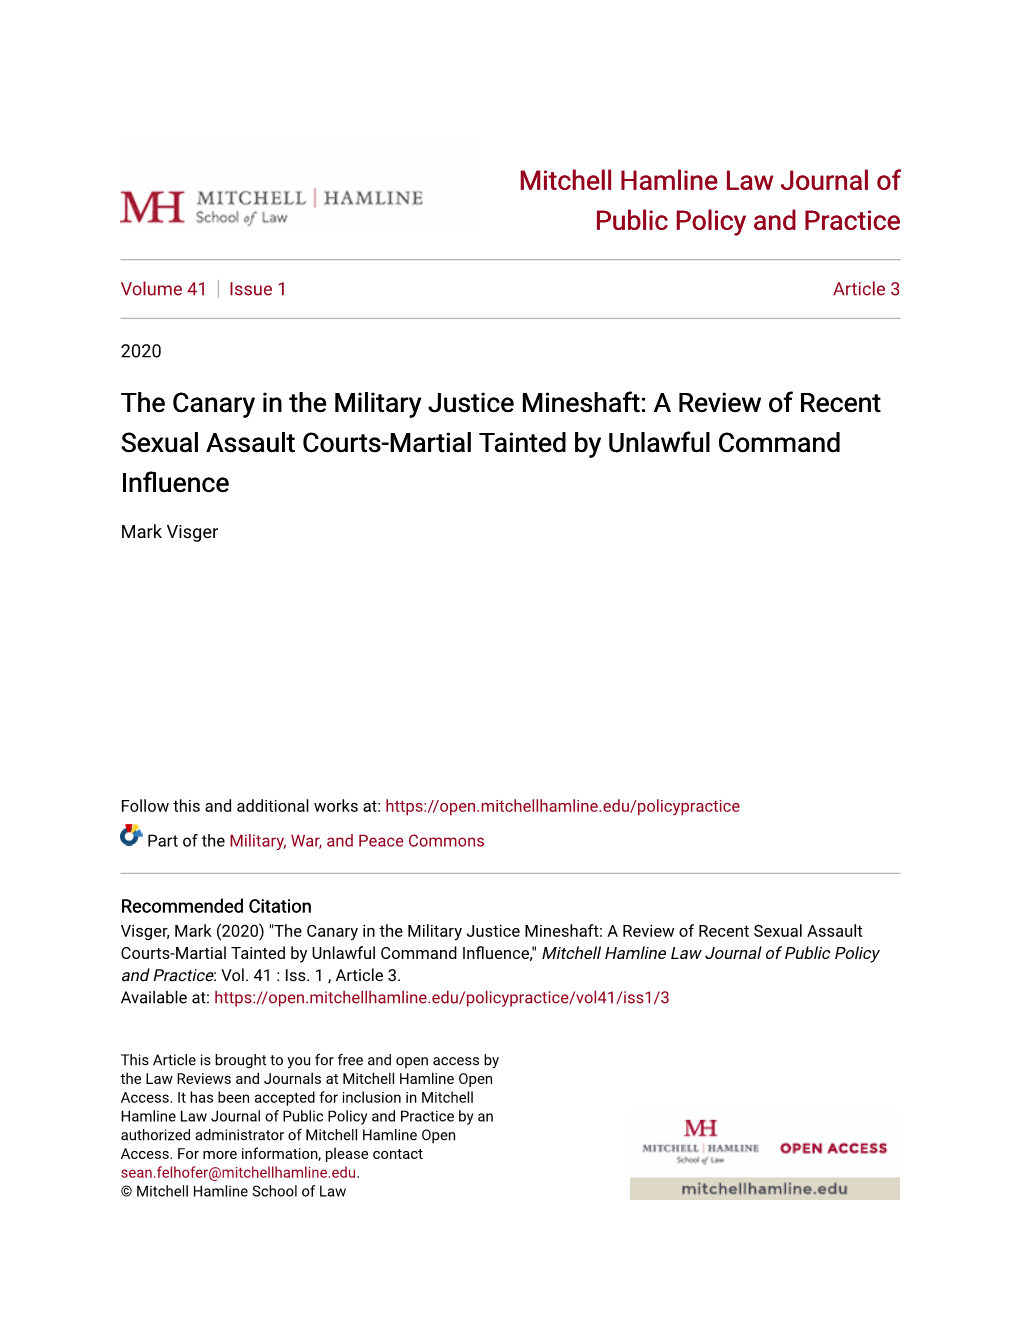 The Canary in the Military Justice Mineshaft: a Review of Recent Sexual Assault Courts-Martial Tainted by Unlawful Command Influence